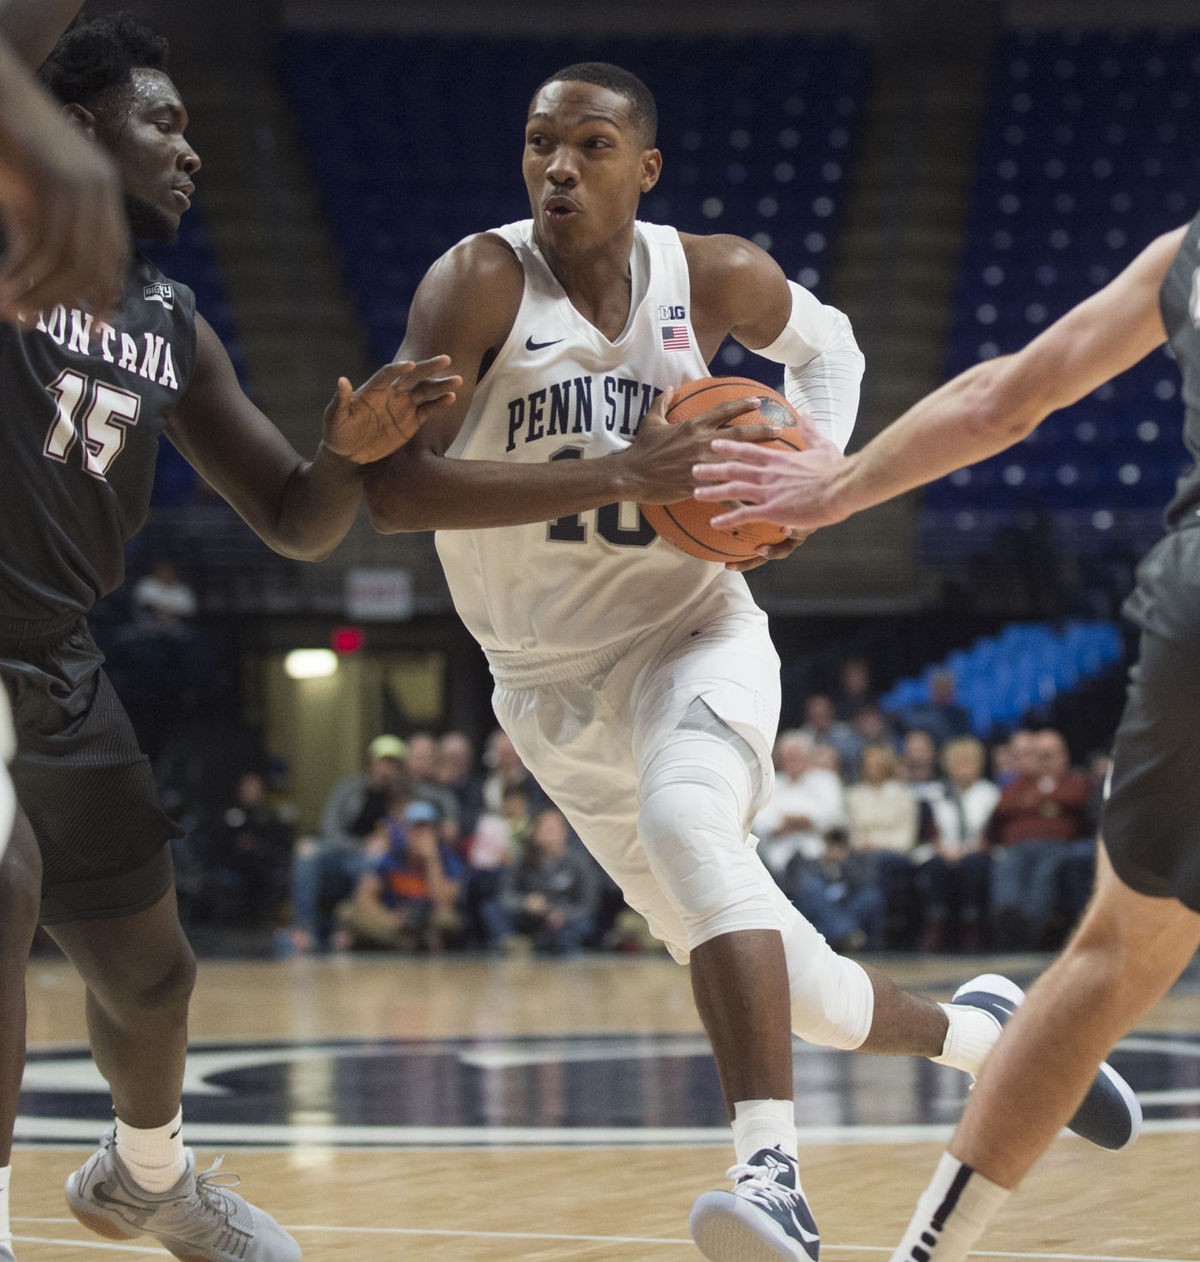 Penn State men's basketball set for instate bout with Pitt at Legends